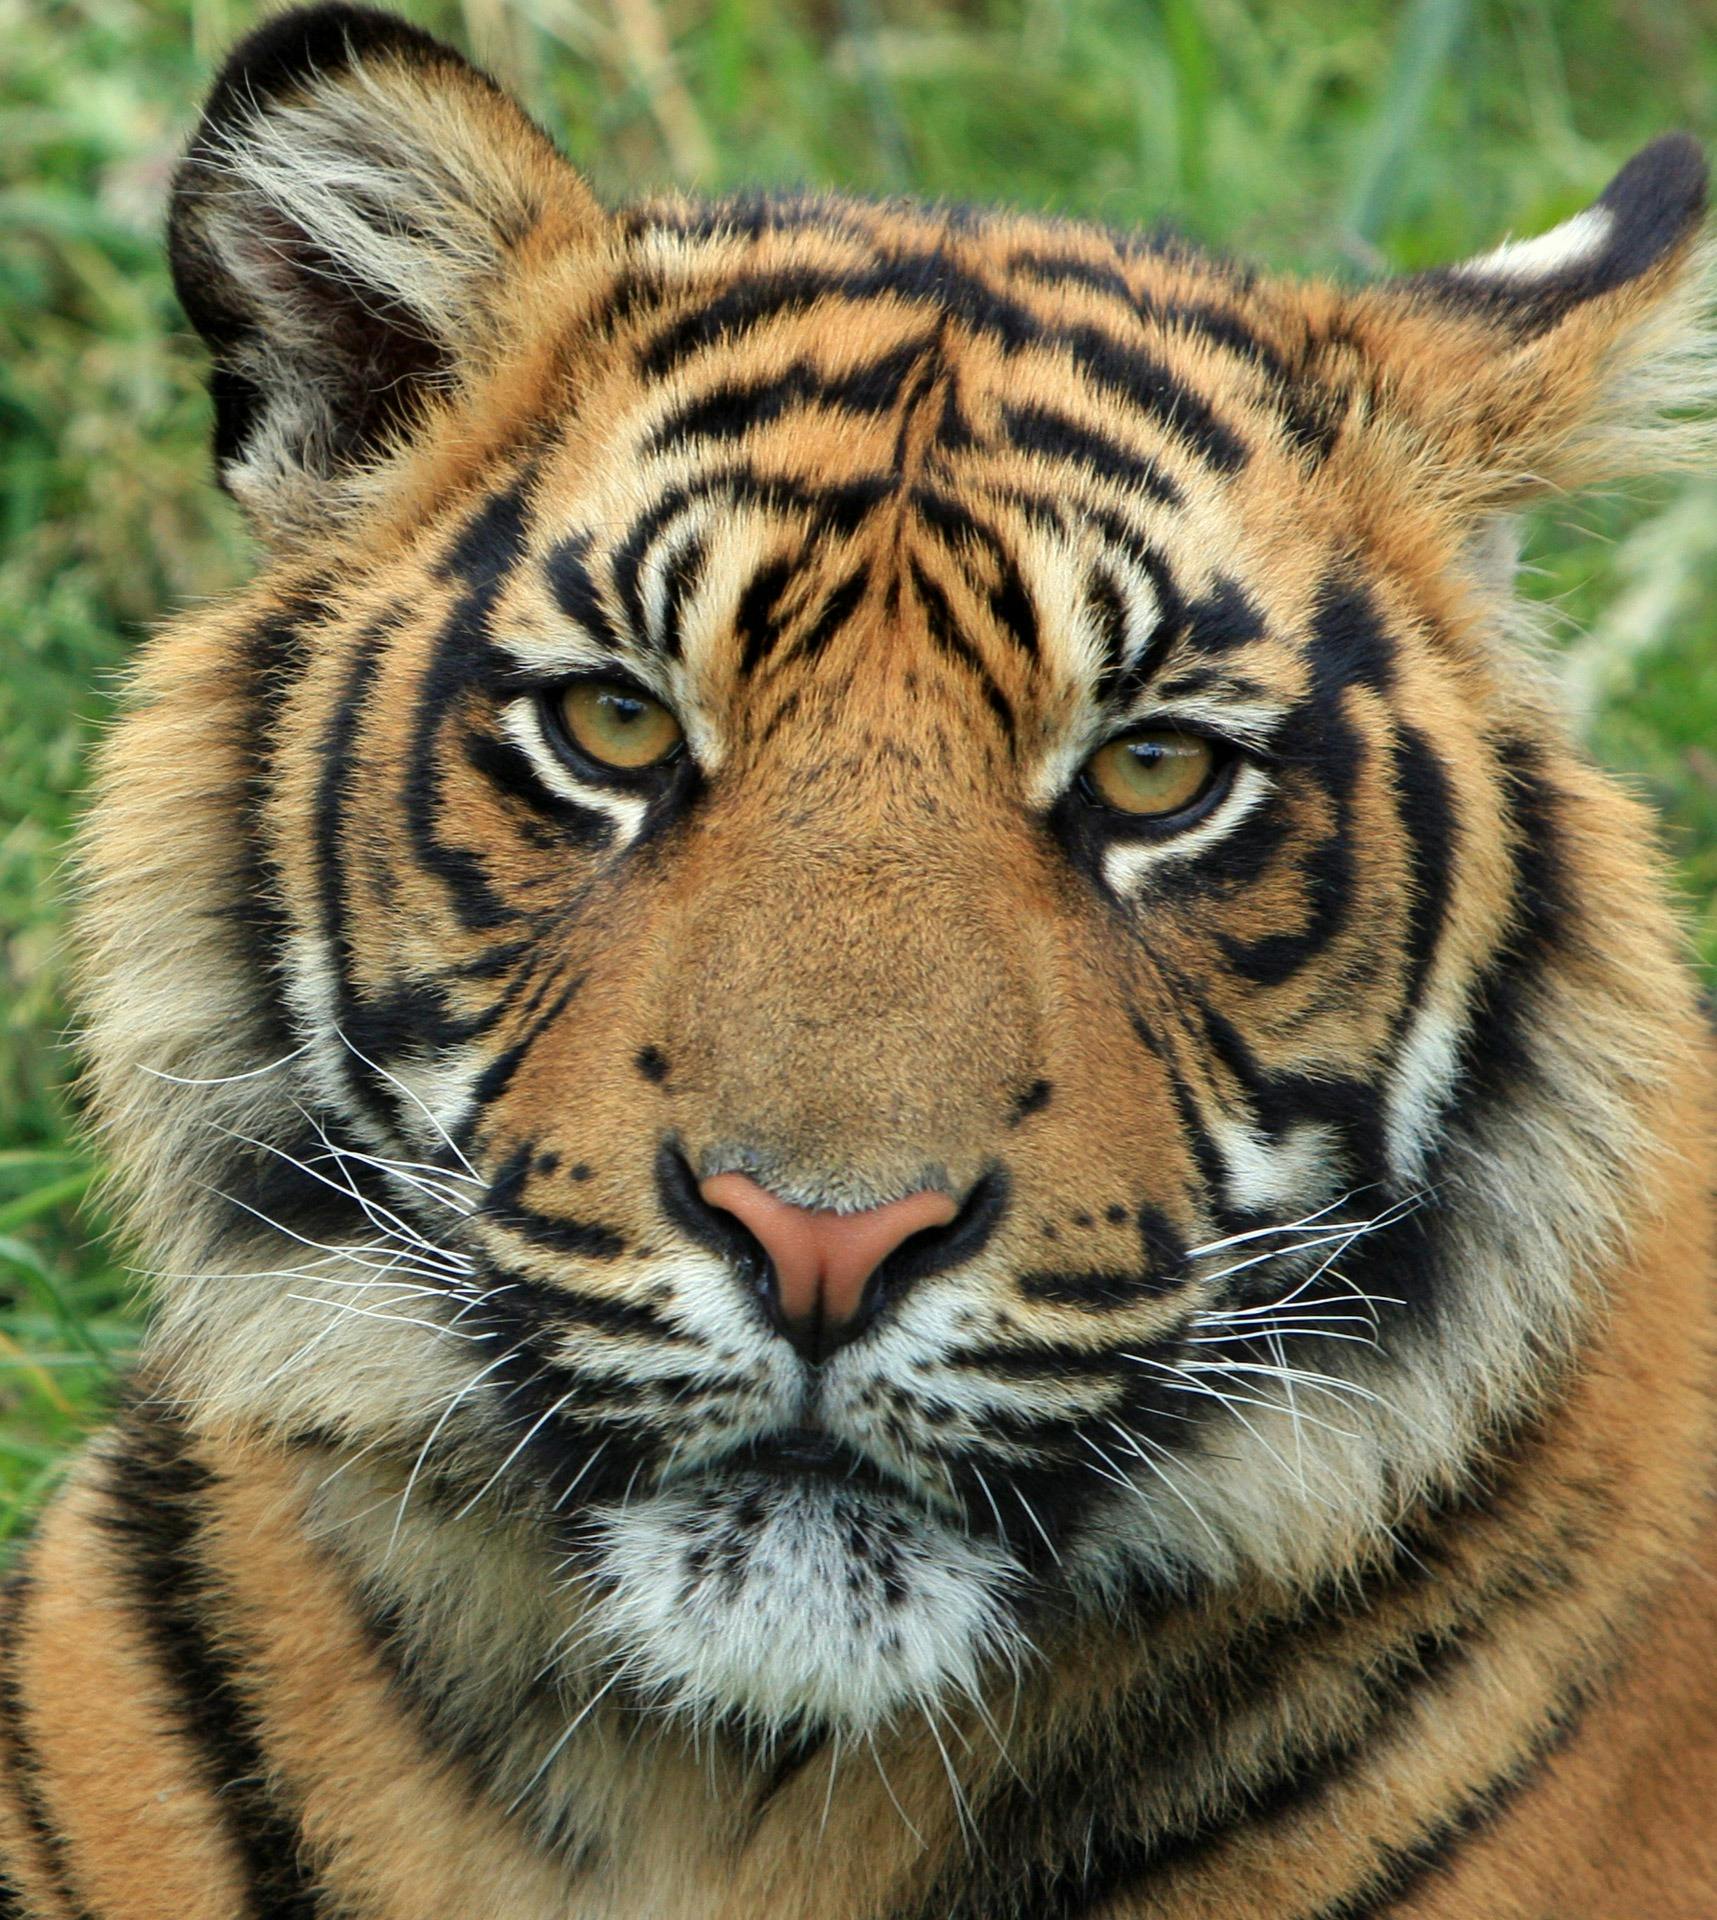 a close up of a tiger in the grass, facing the camera